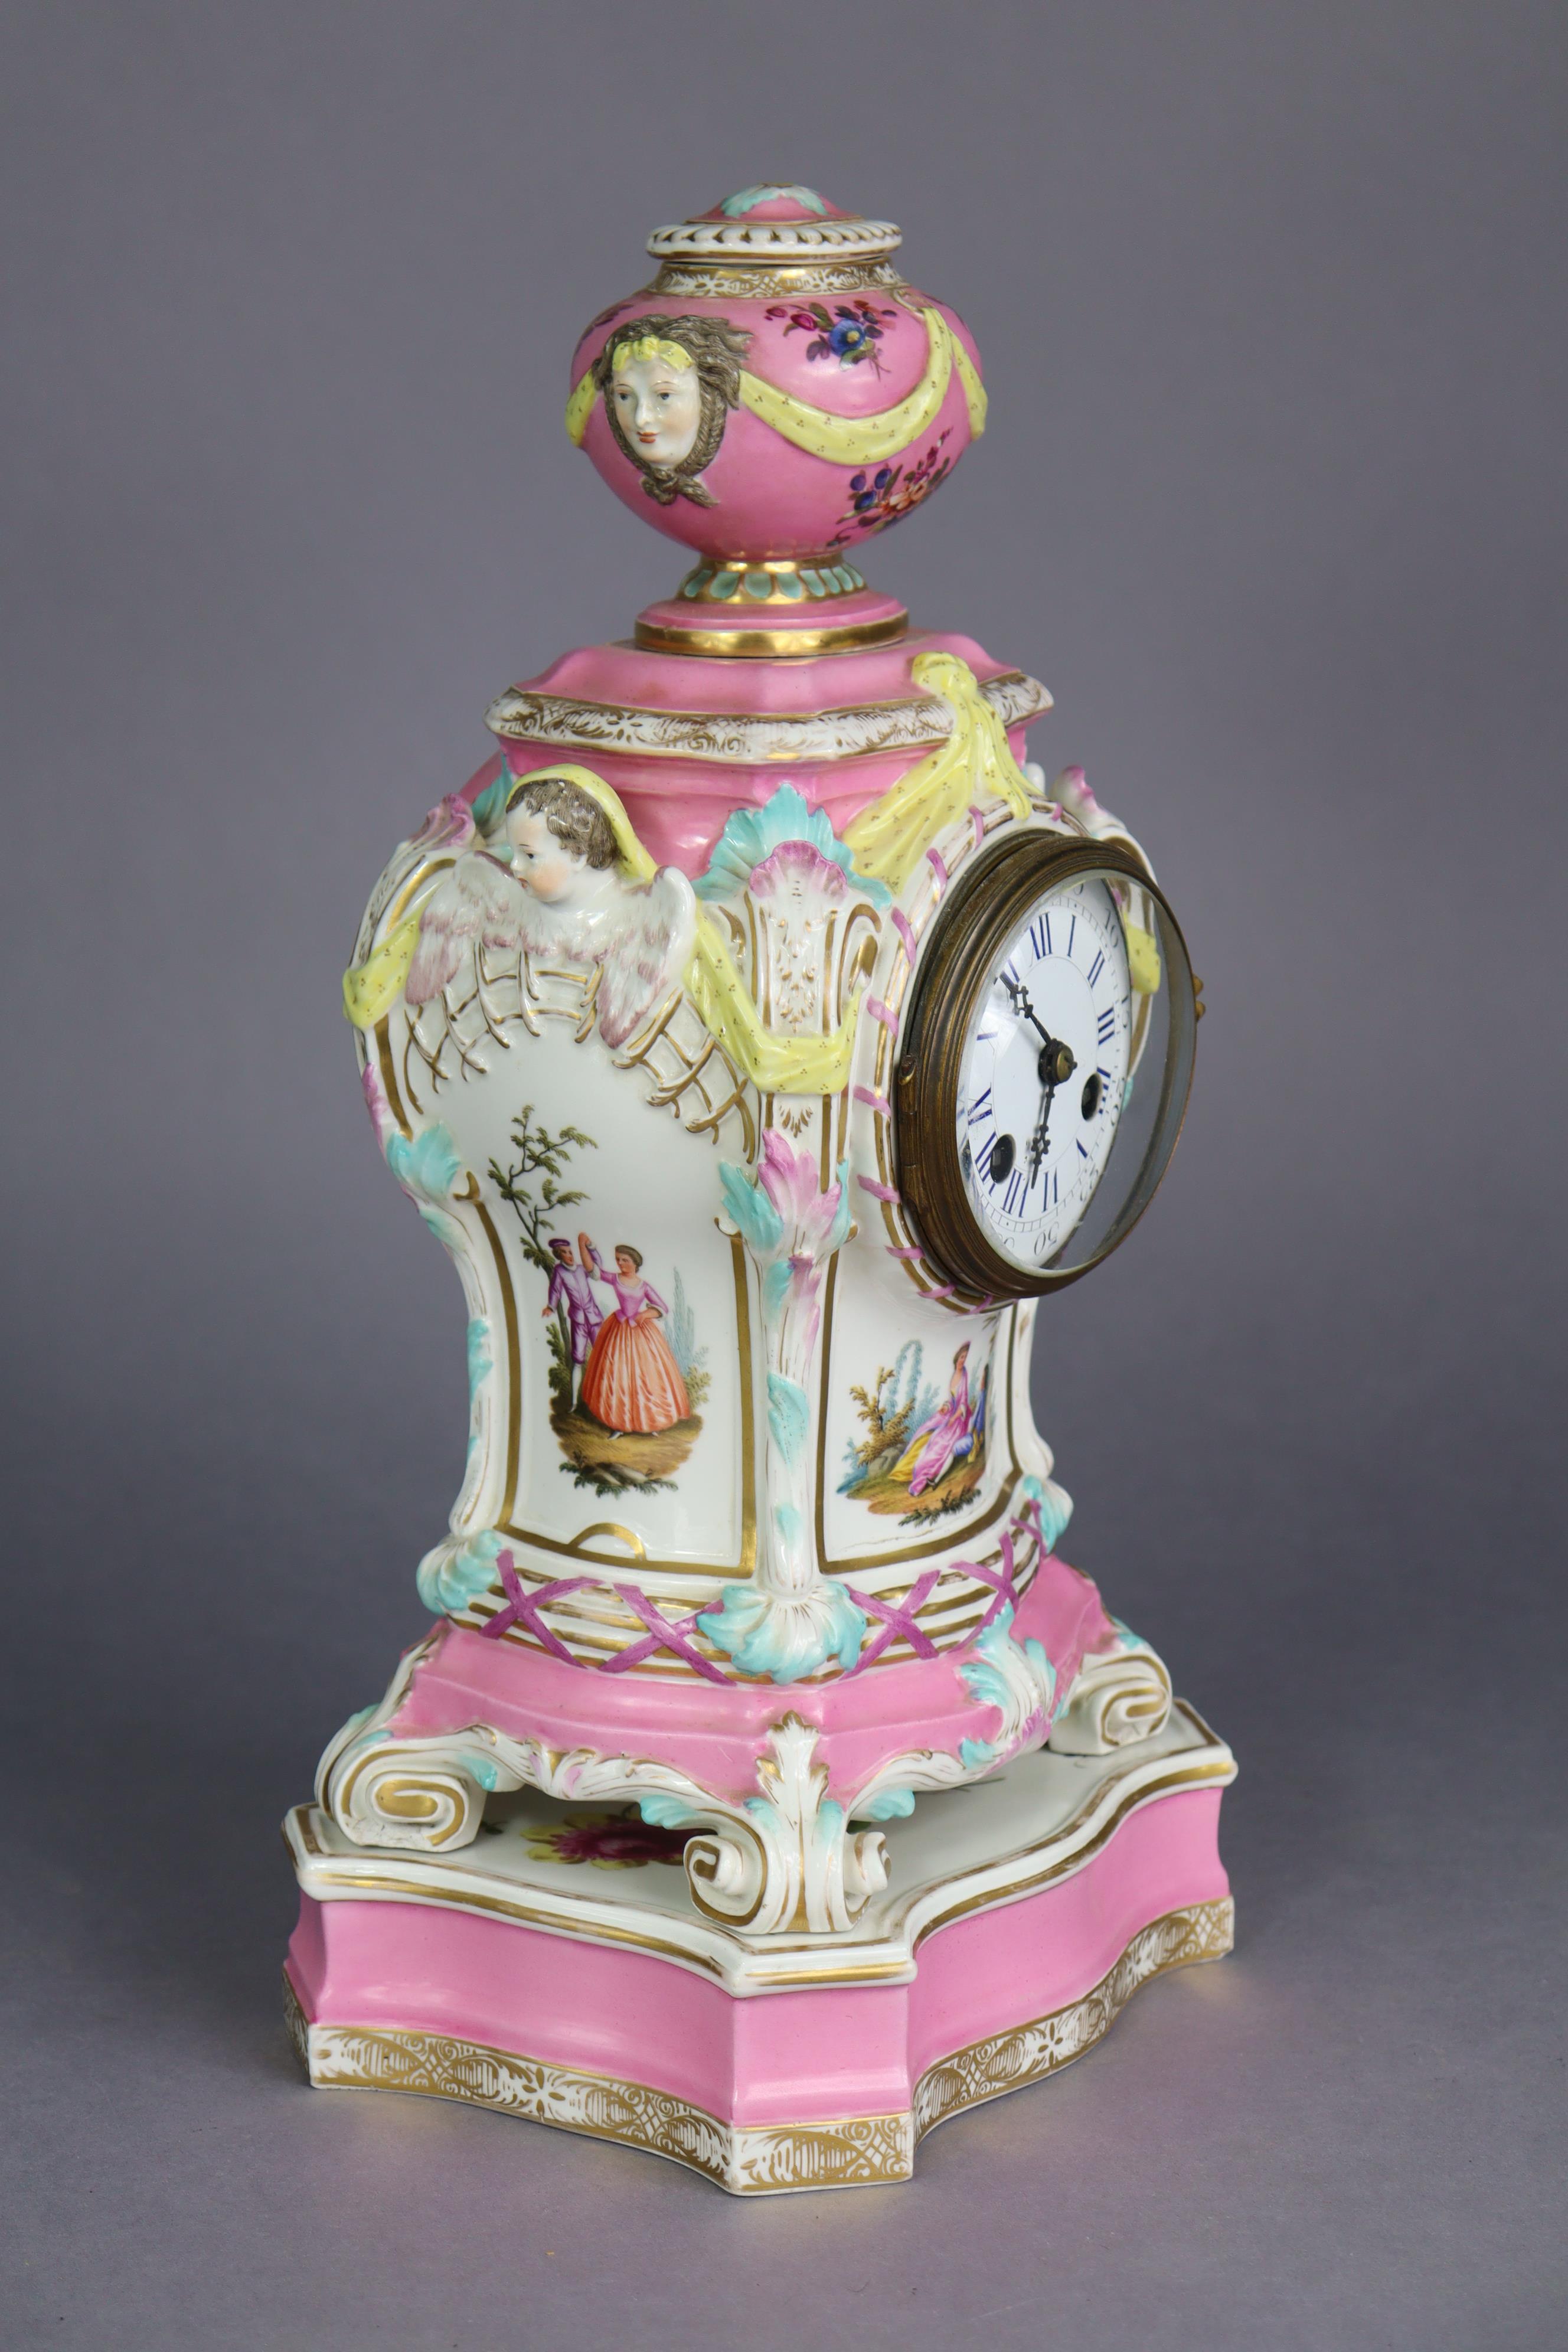 A 19th century Berlin porcelain mantel clock in pink-ground baluster form case, with urn finial & - Image 3 of 10